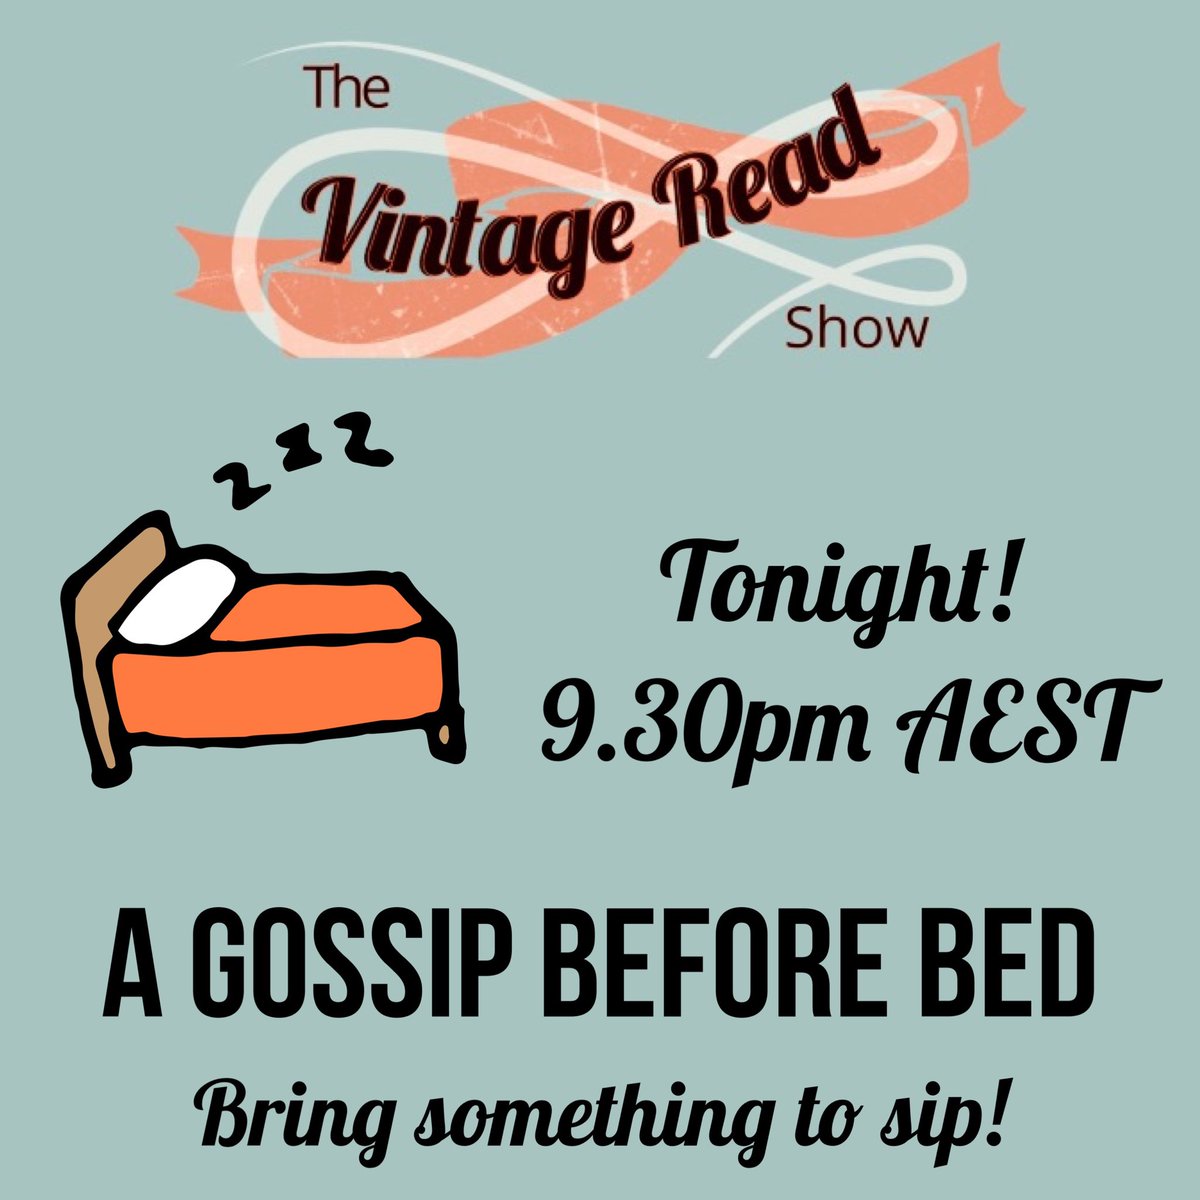 Light chat and giggles! Hope you’ll join me! 😊💗🤗 x #gossipbeforebed #thevintageread